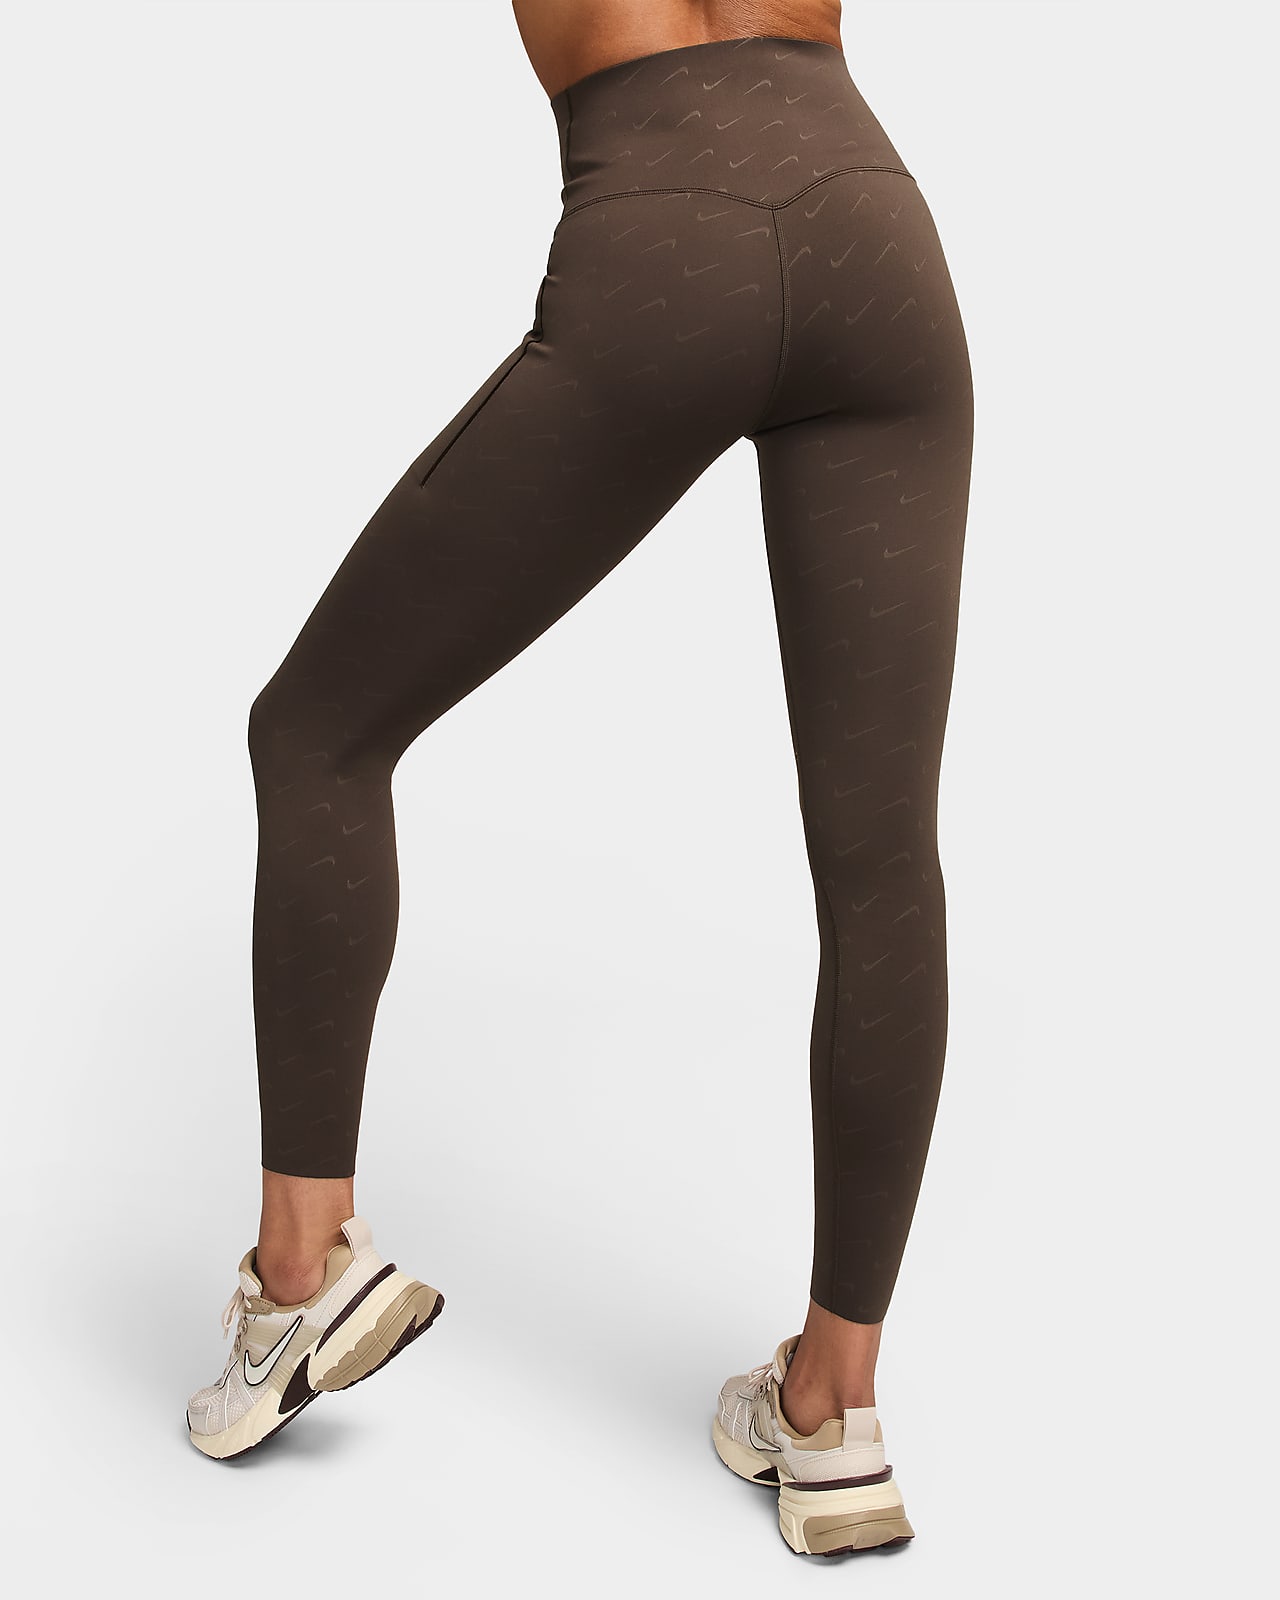 NIKE Womens Brown Moisture Wicking Pocketed Fitted Cropped Drawstring  Printed Active Wear High Waist Leggings XS 